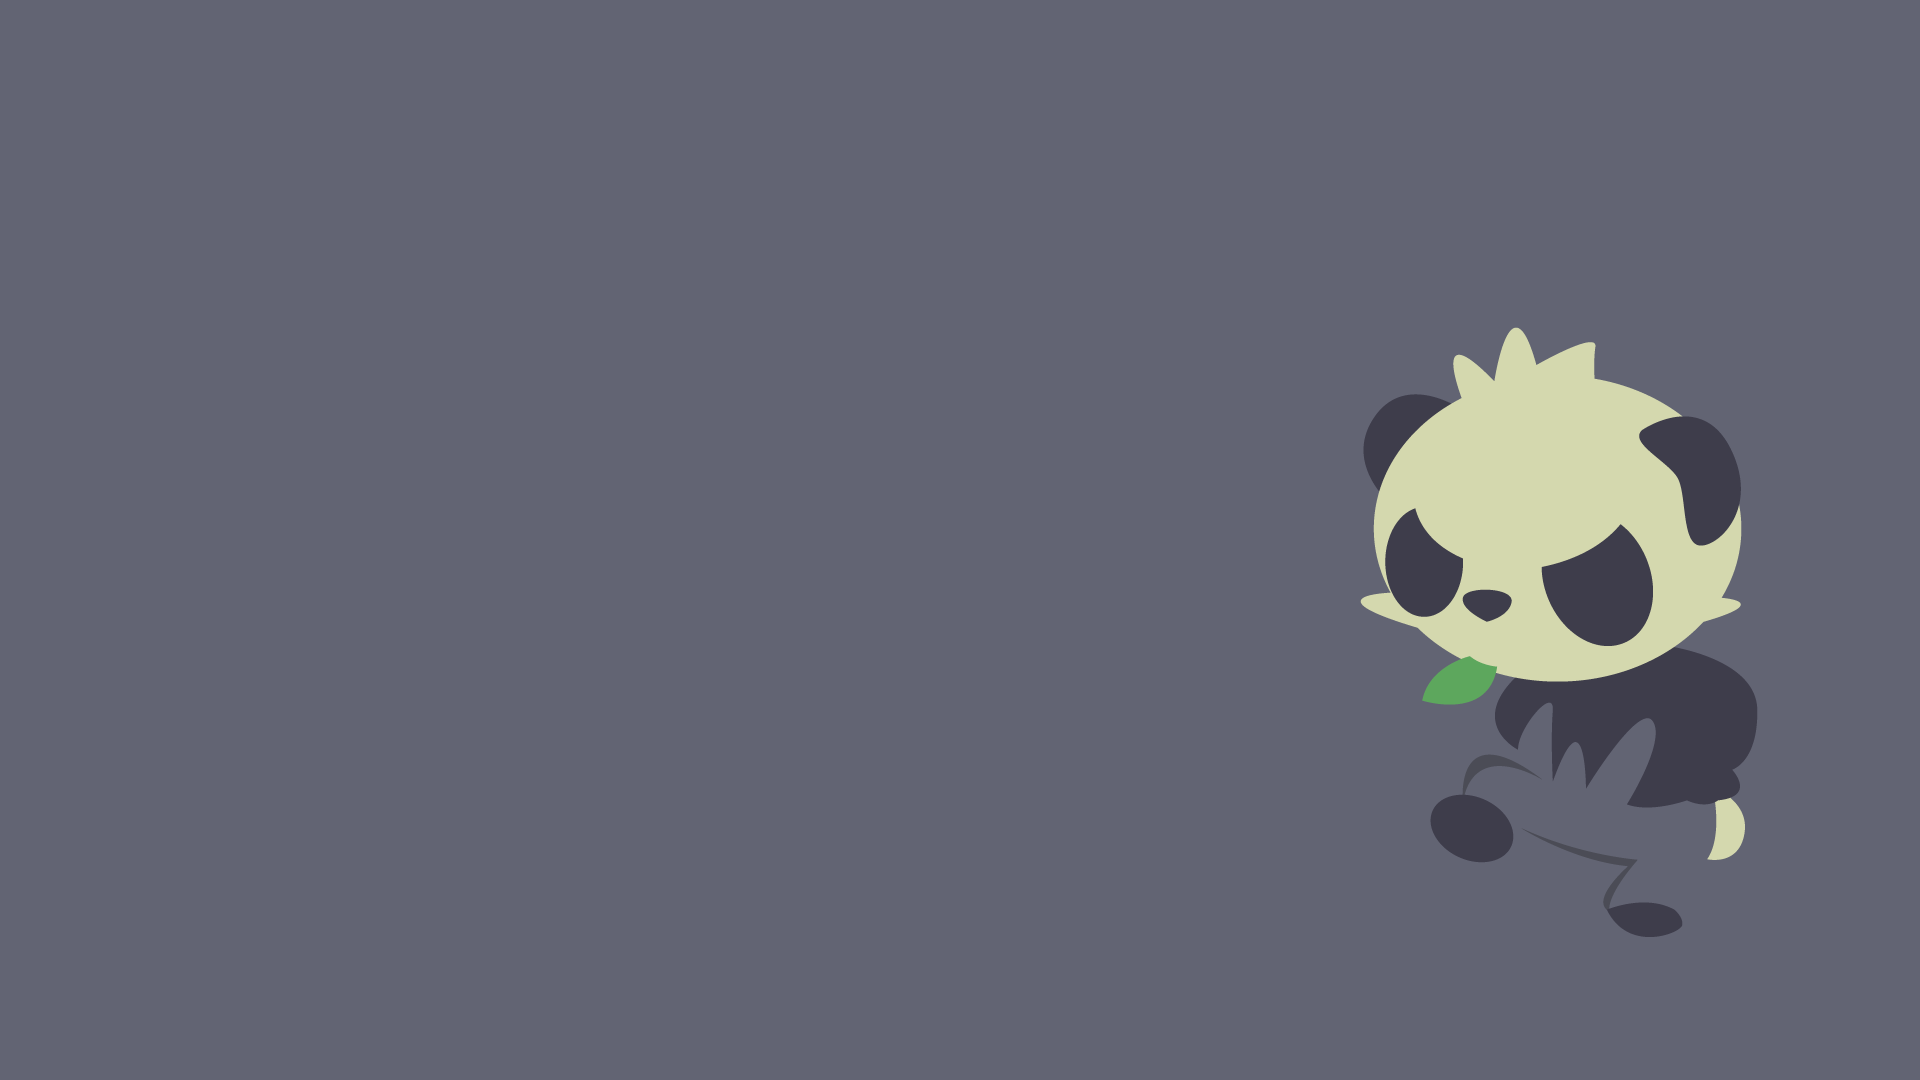 Pancham.png. The Andy X Challenge